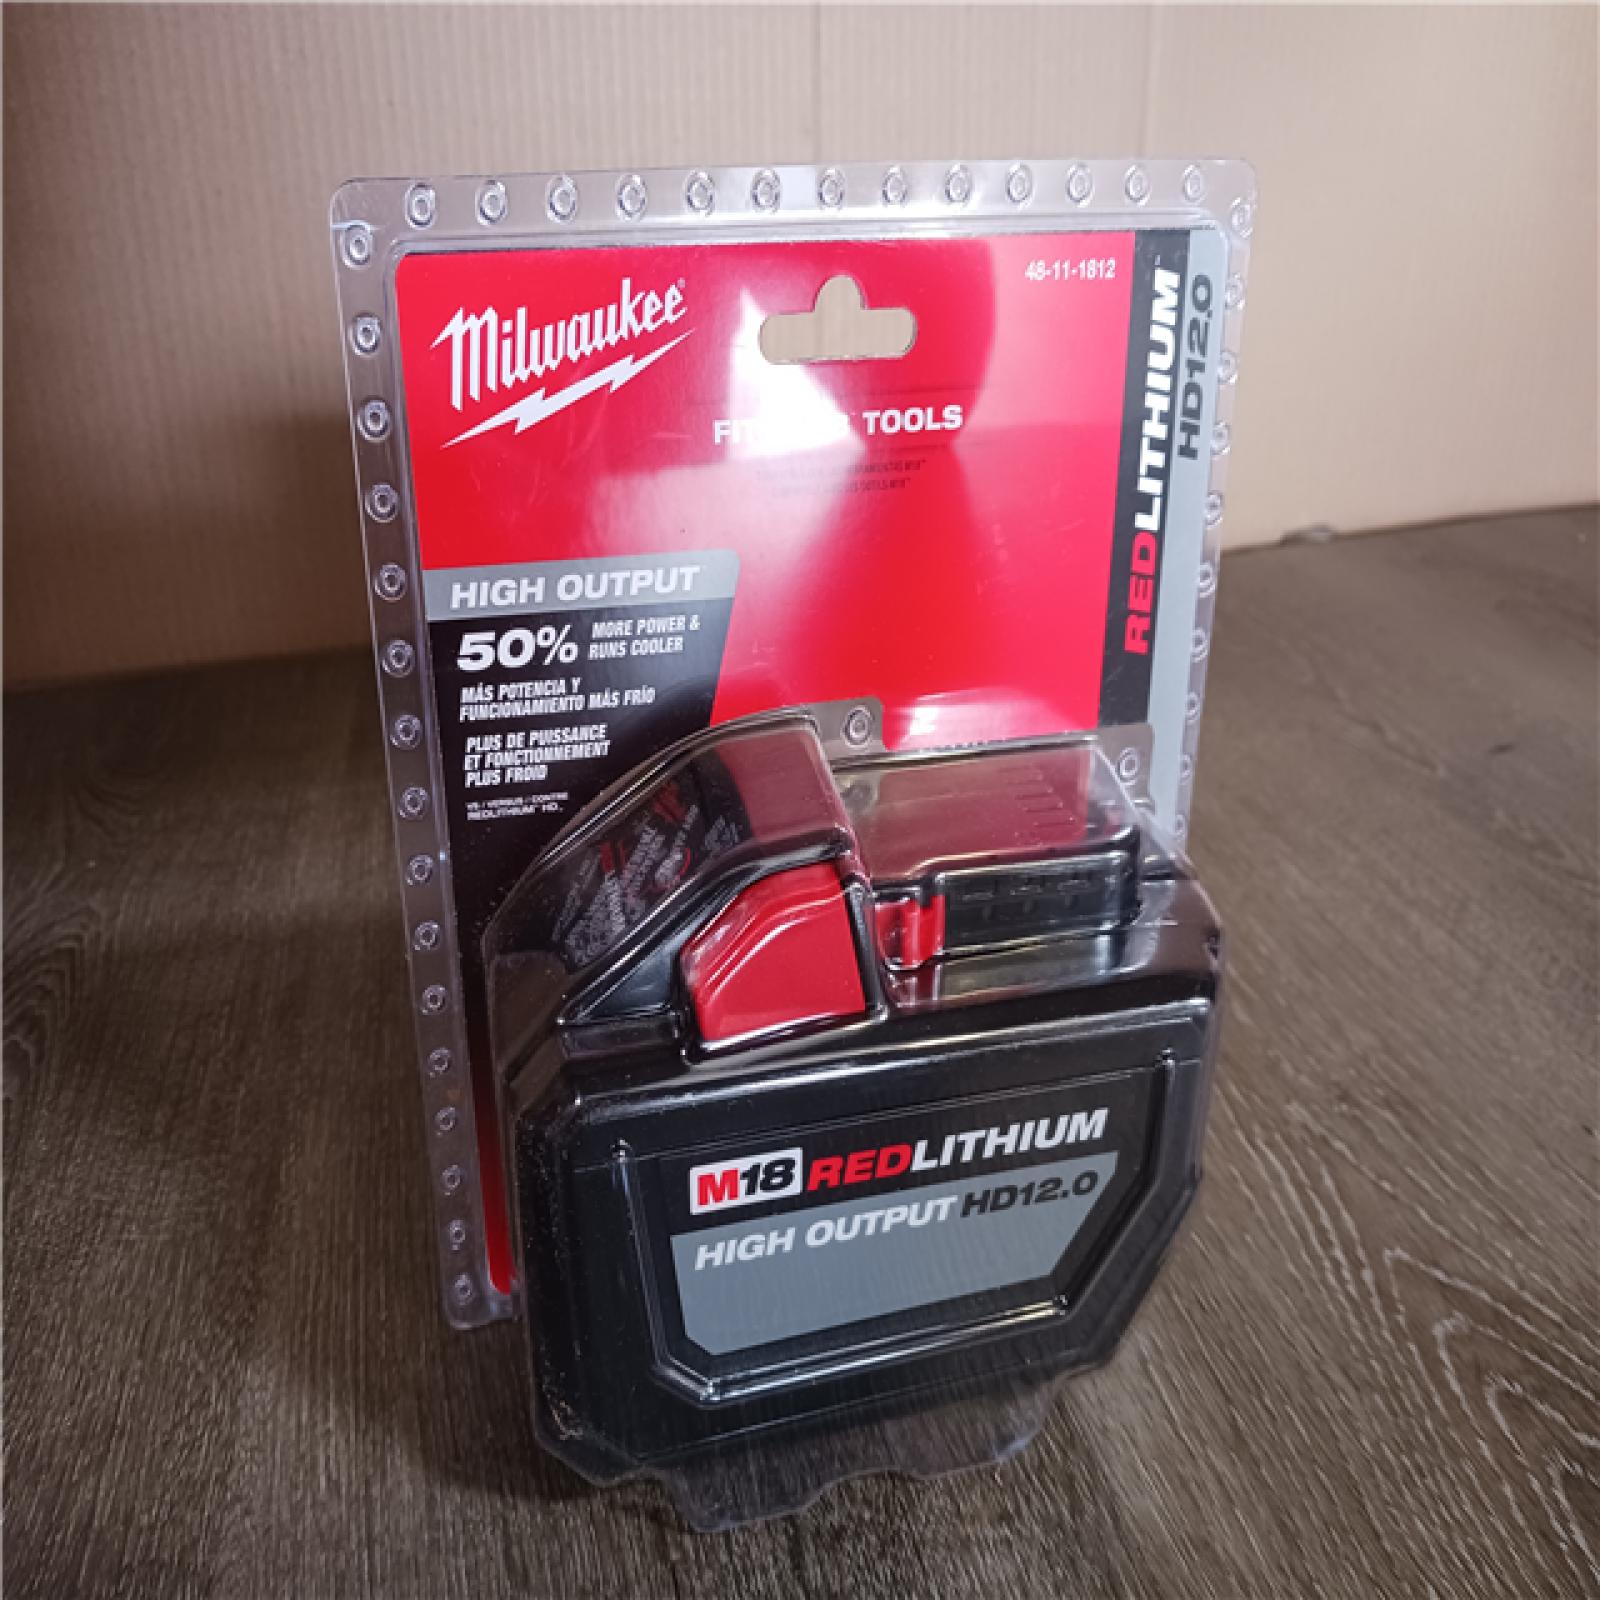 Phoenix Location NEW SEALED Milwaukee 18-Volt Lithium-Ion High Output 6.0Ah Battery Pack (2-Pack) 48-11-1862